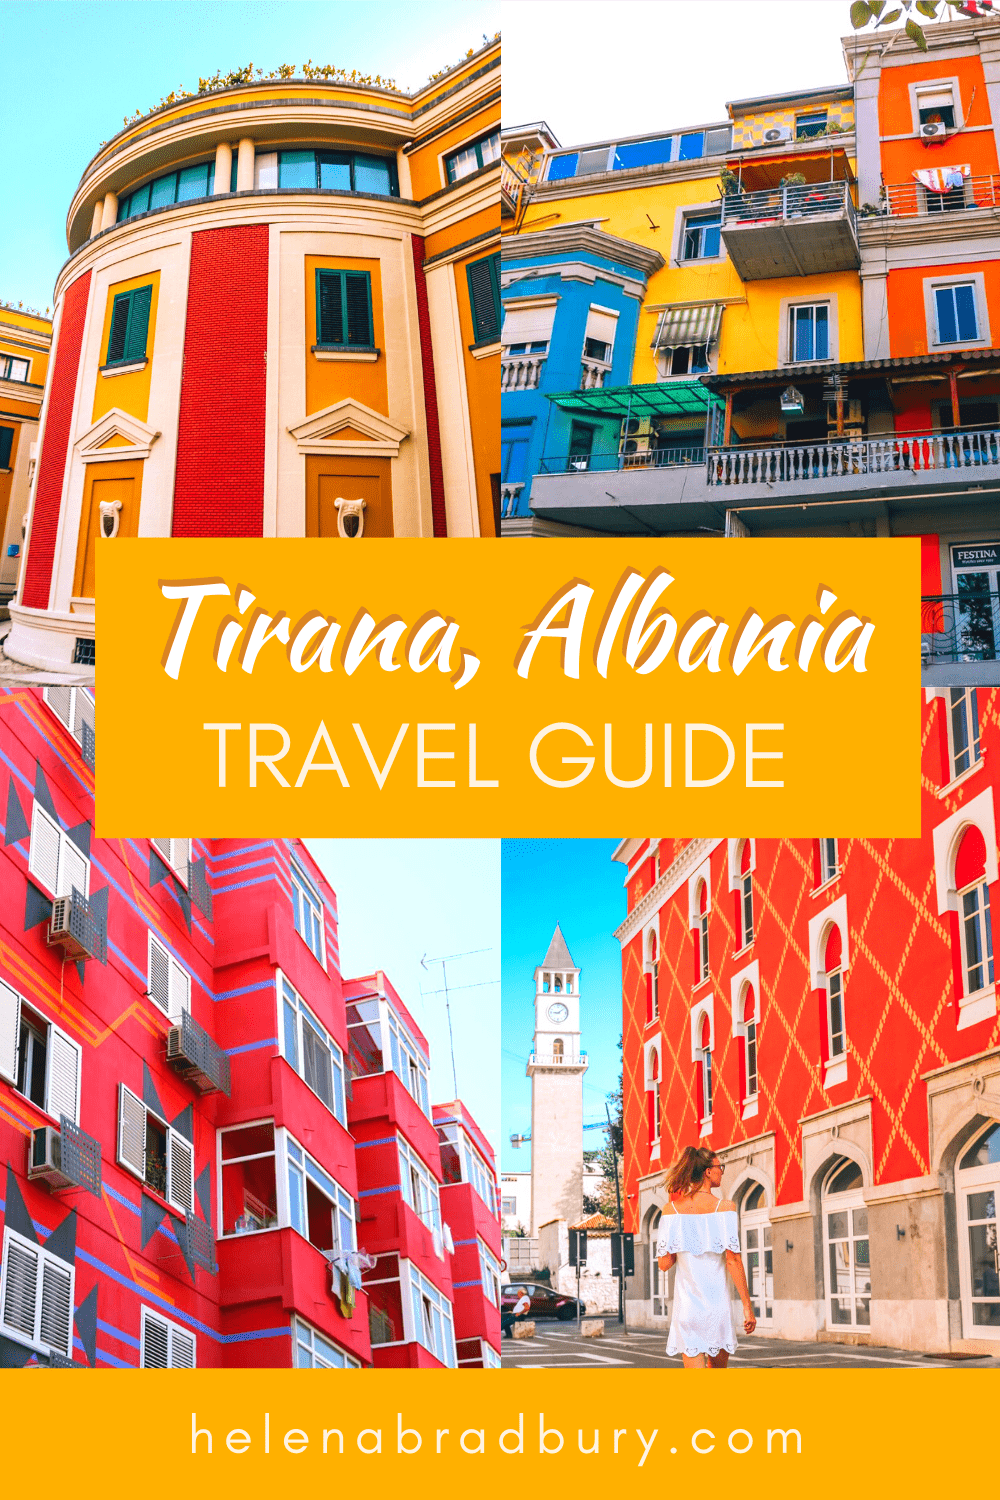 Tirana Guide: What to do in Tirana, Albania in two days